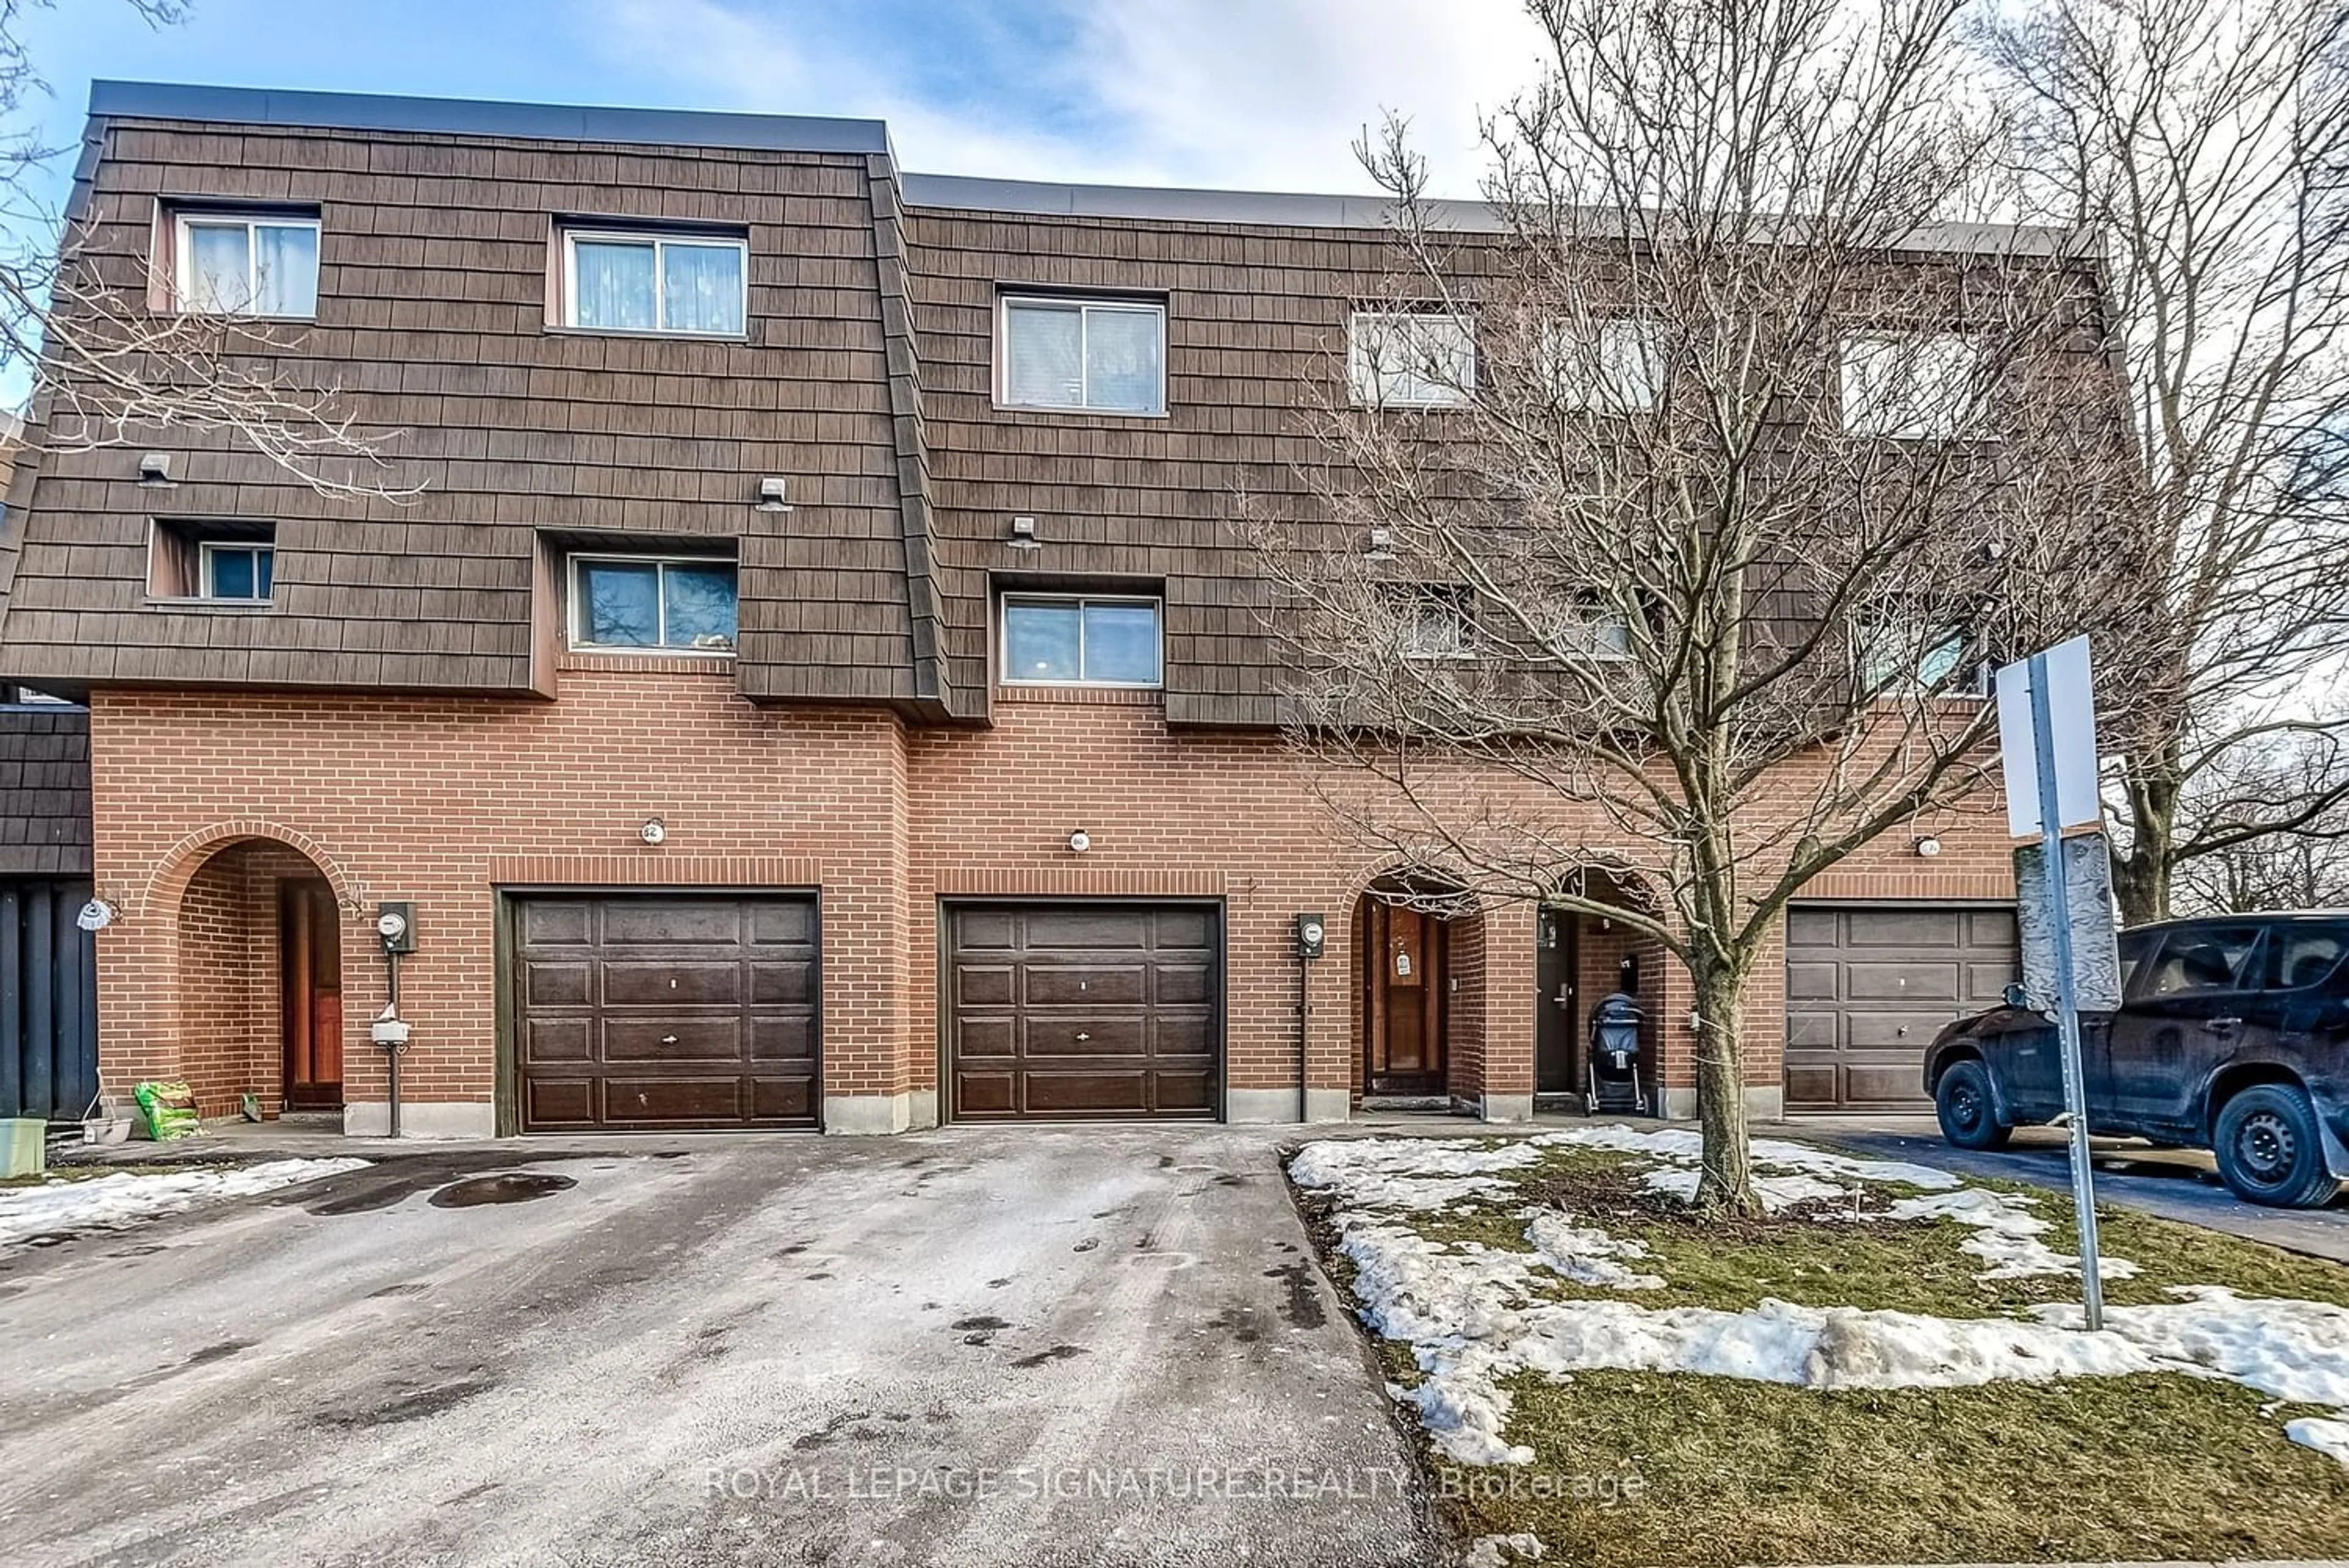 Home with unknown exterior material for 80 Darras Crt, Brampton Ontario L6T 1W7